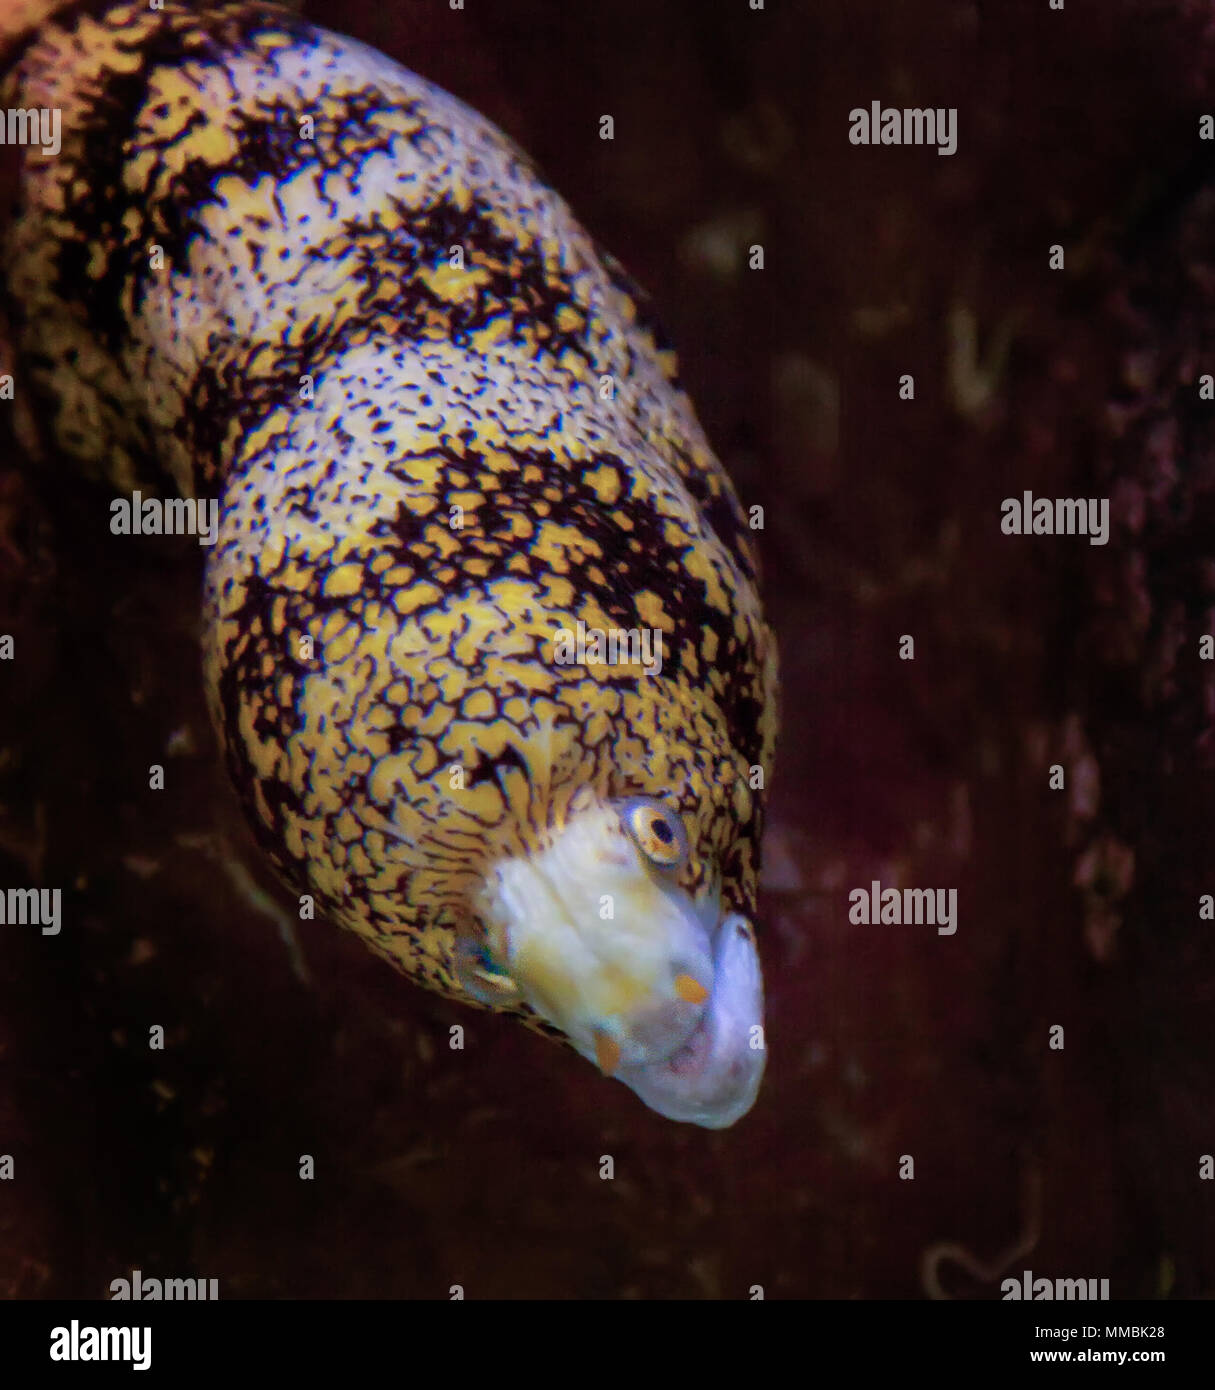 Snowflake eel living in an aquarium. It is emerging from the hole in which it lives. Stock Photo